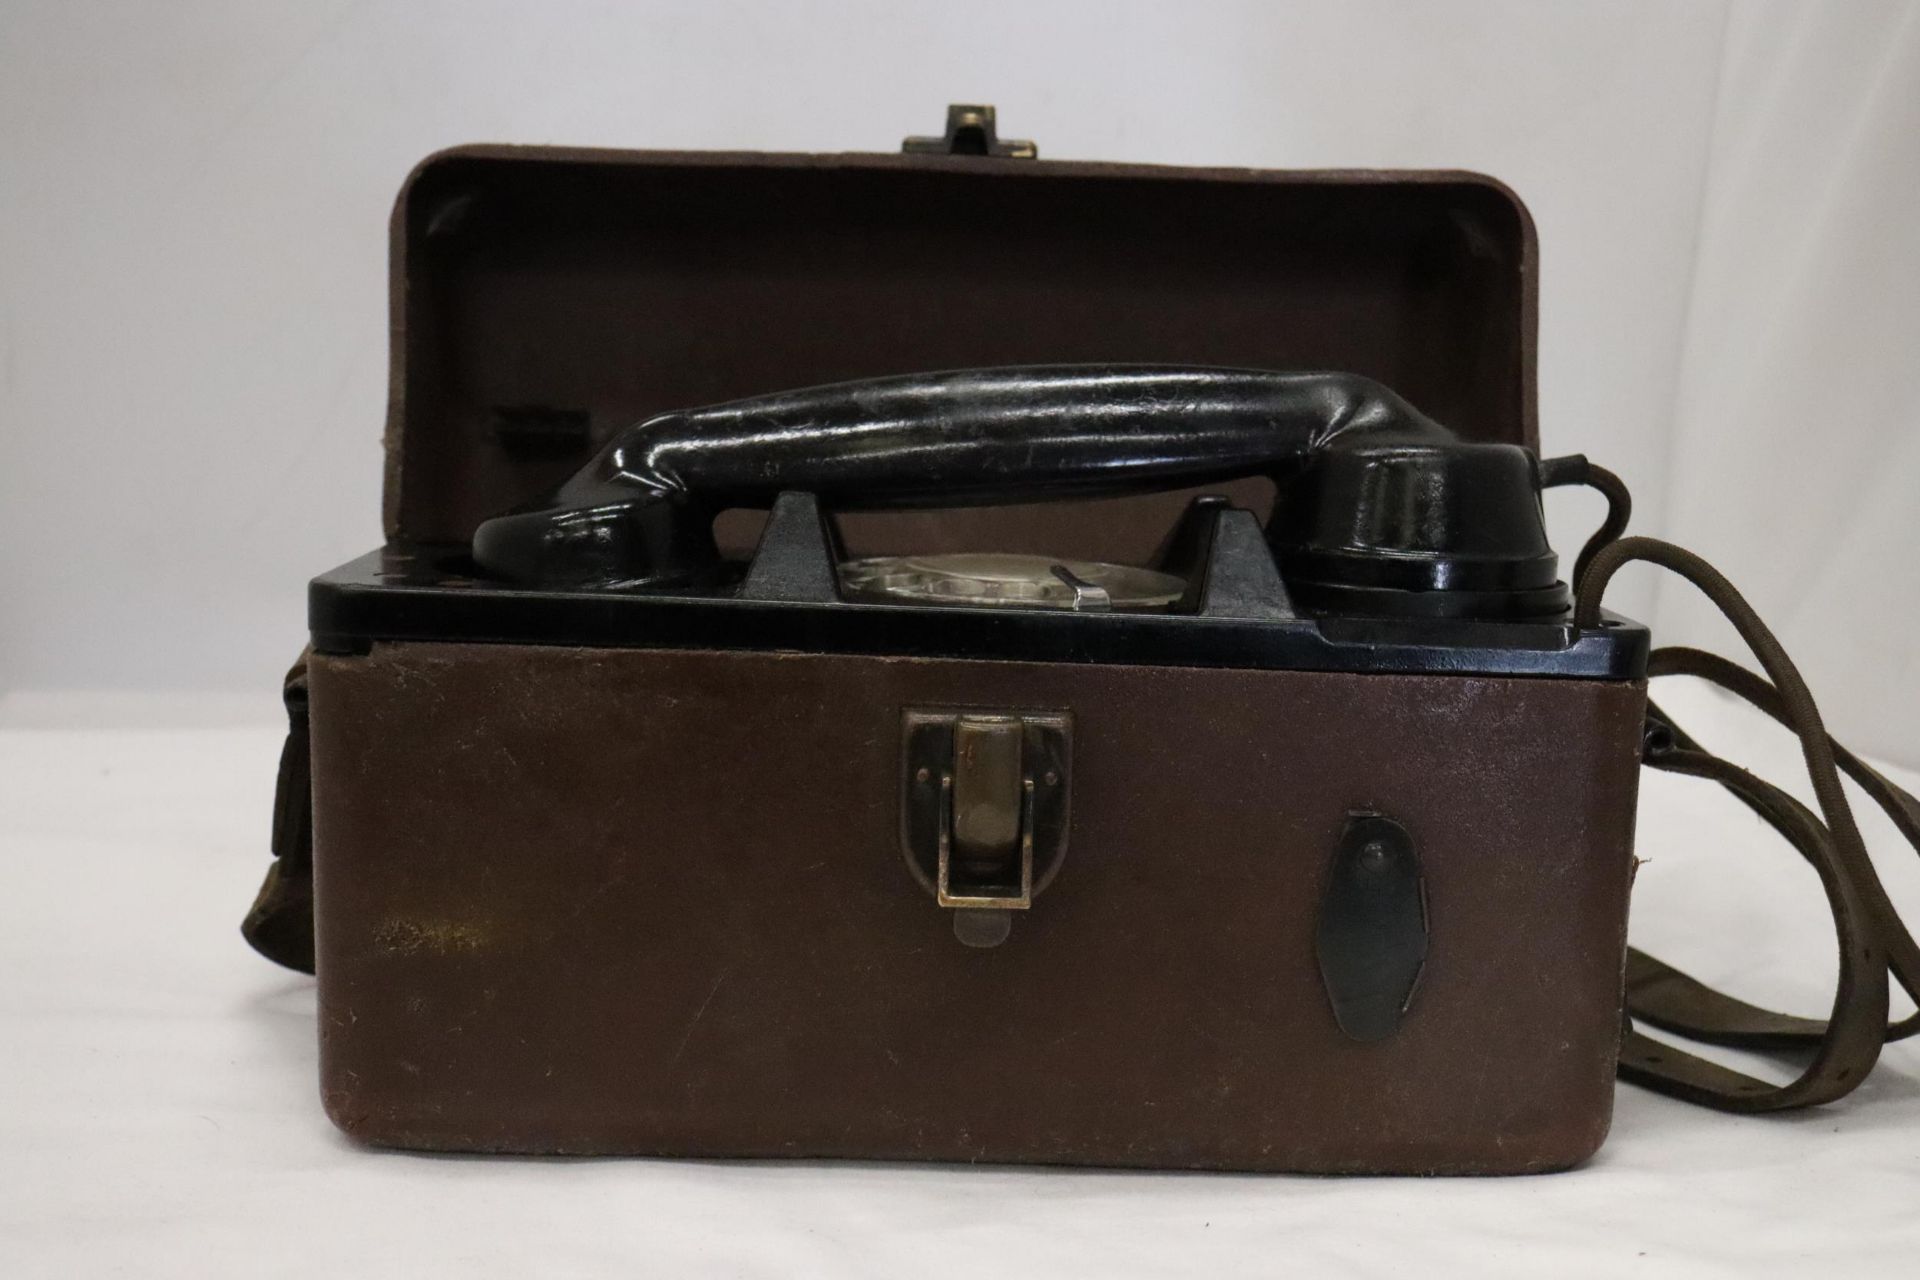 A WORLD WAR 11 MILITARY TELEPHONE IN A LEATHER CASE - Image 5 of 7